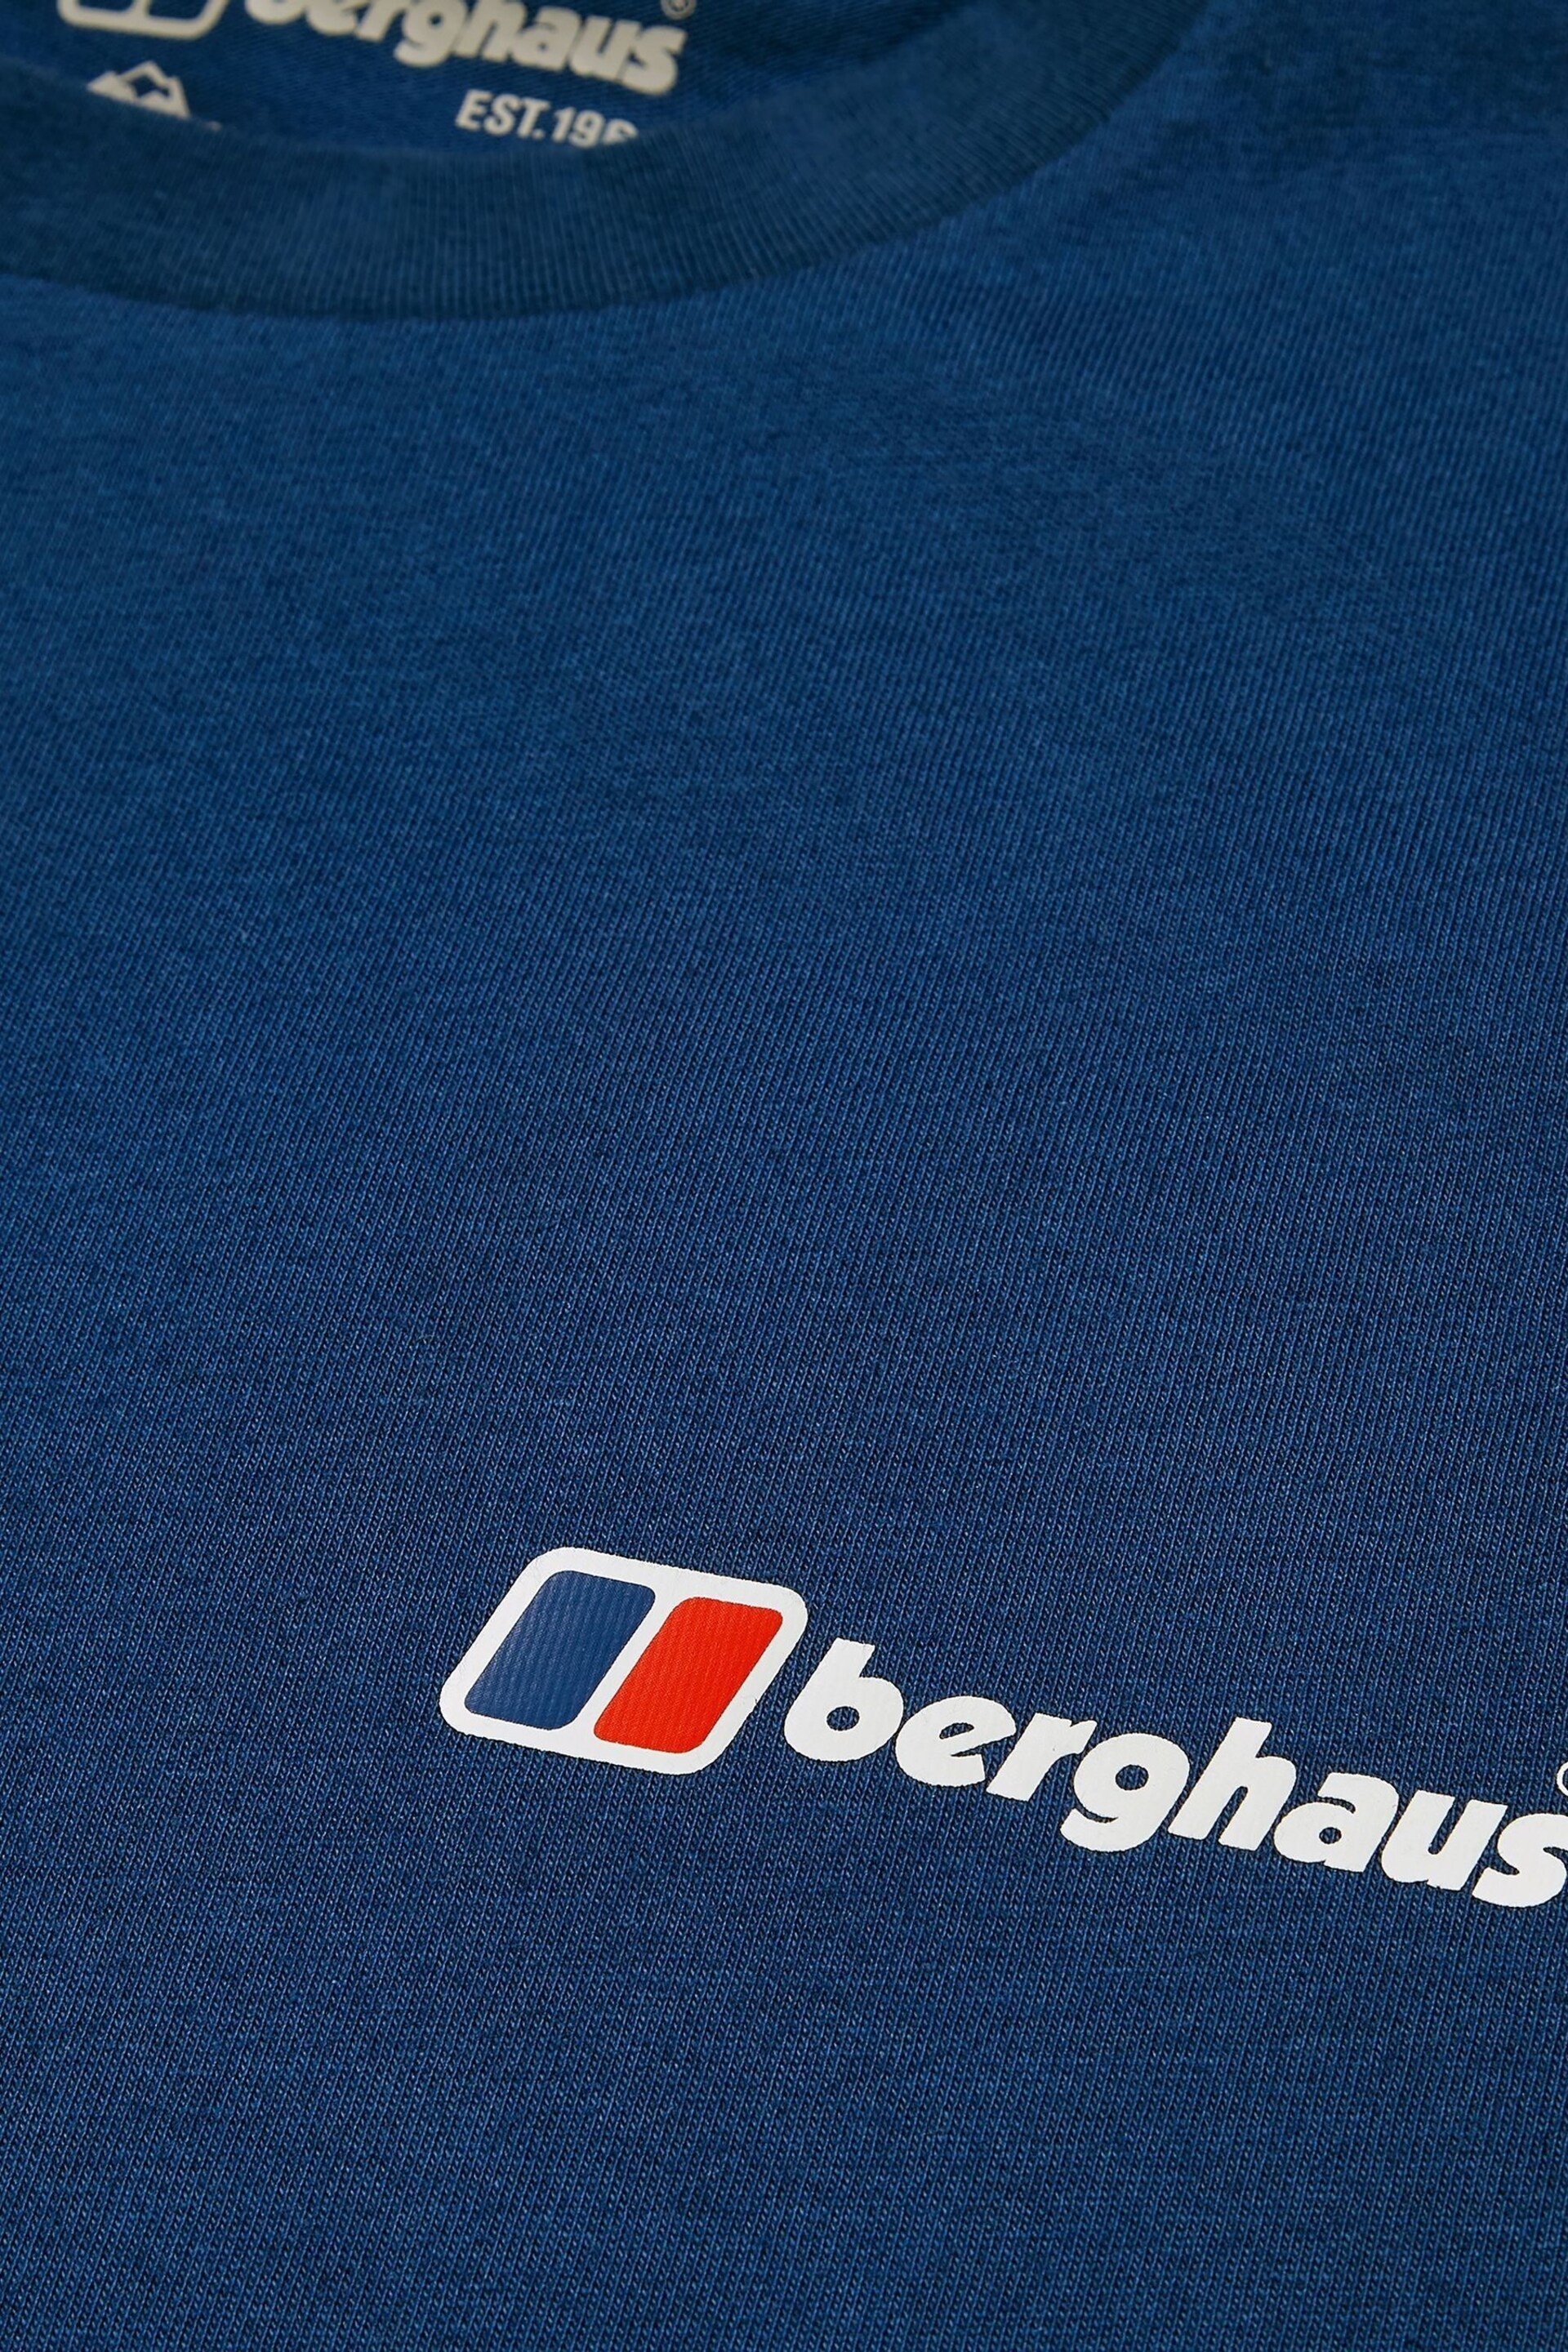 Berghaus Everyday Skinny Stretch Trousers - Image 7 of 7